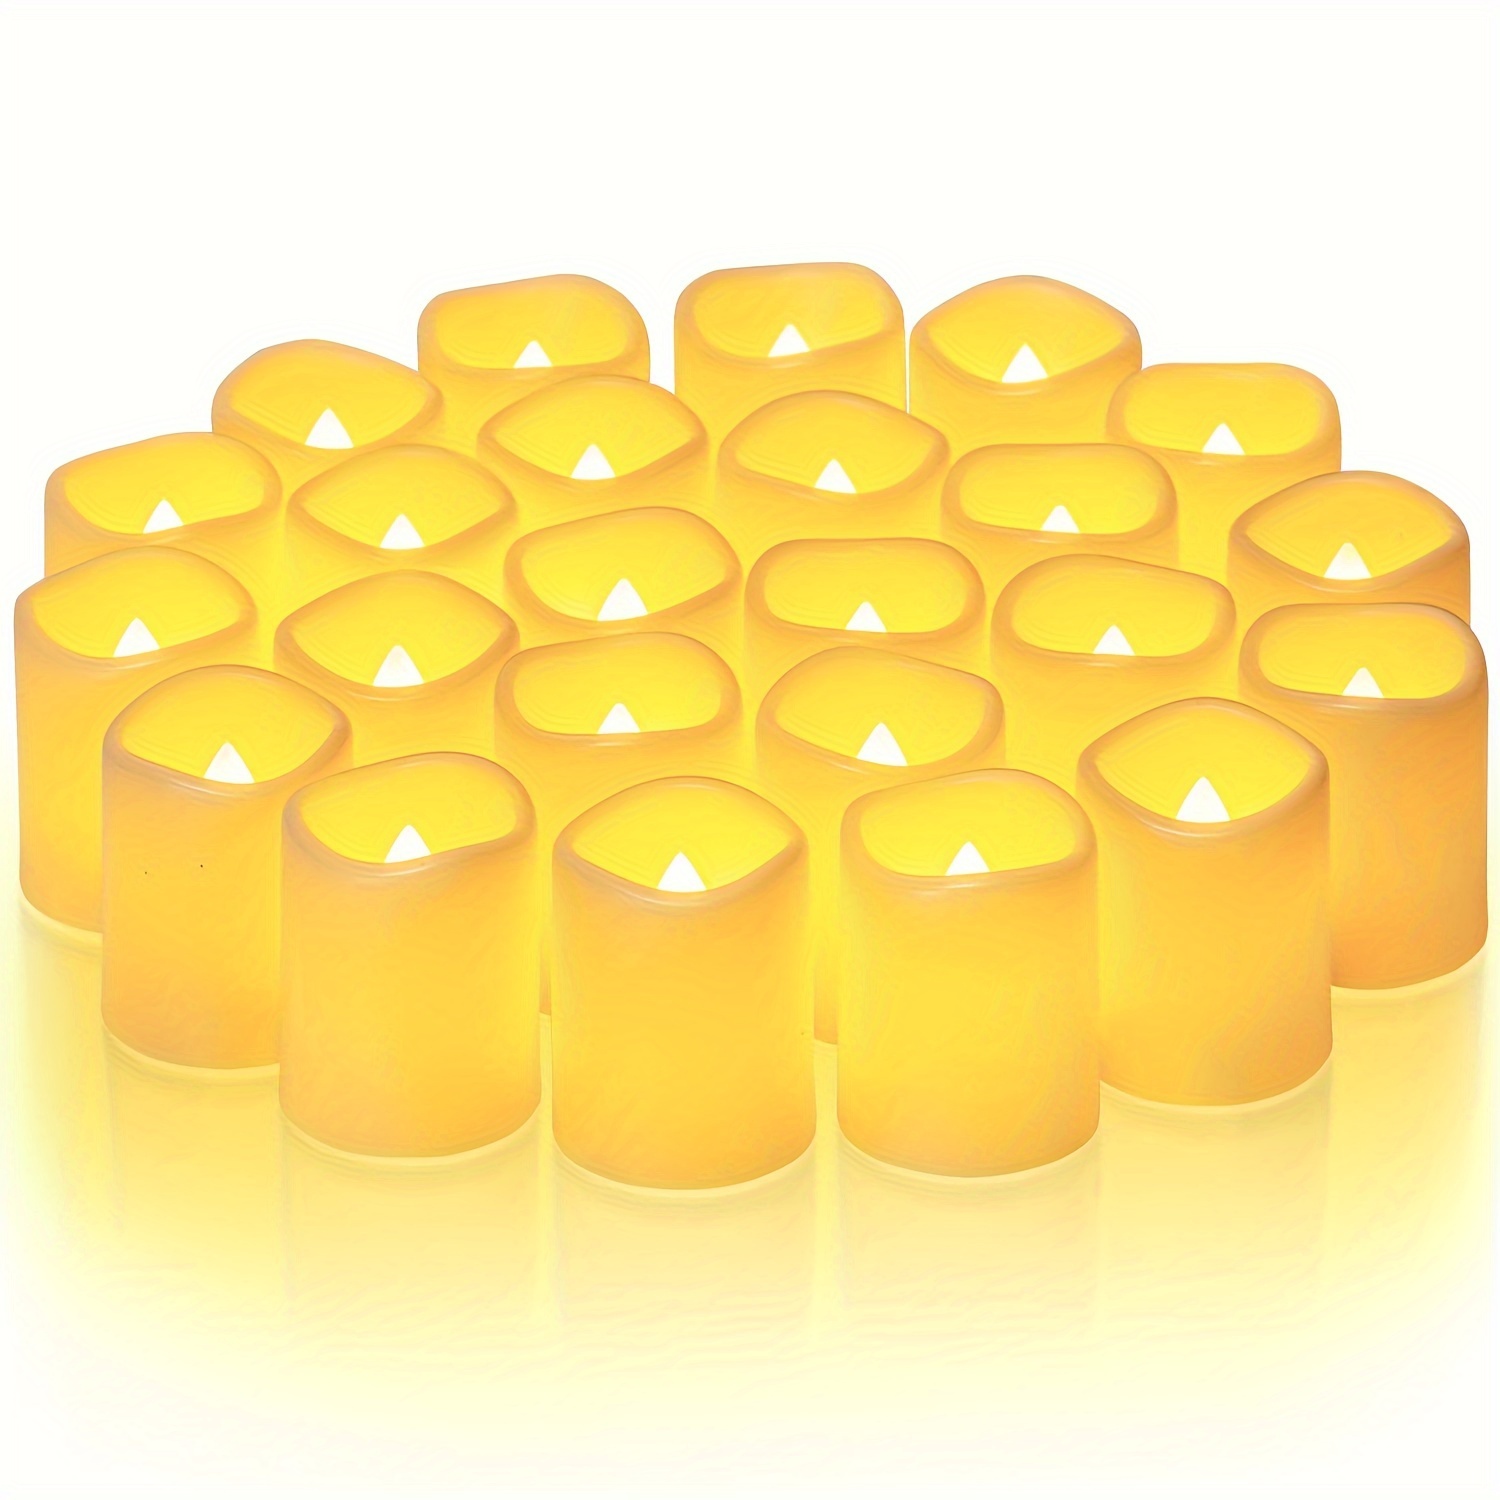 

24pcs Flickering Flameless Votive Candles, Battery Operated Led Votive Tealight Candles, Realistic Electricn Fake Candle For Easter, Wedding, Table (battery Included)